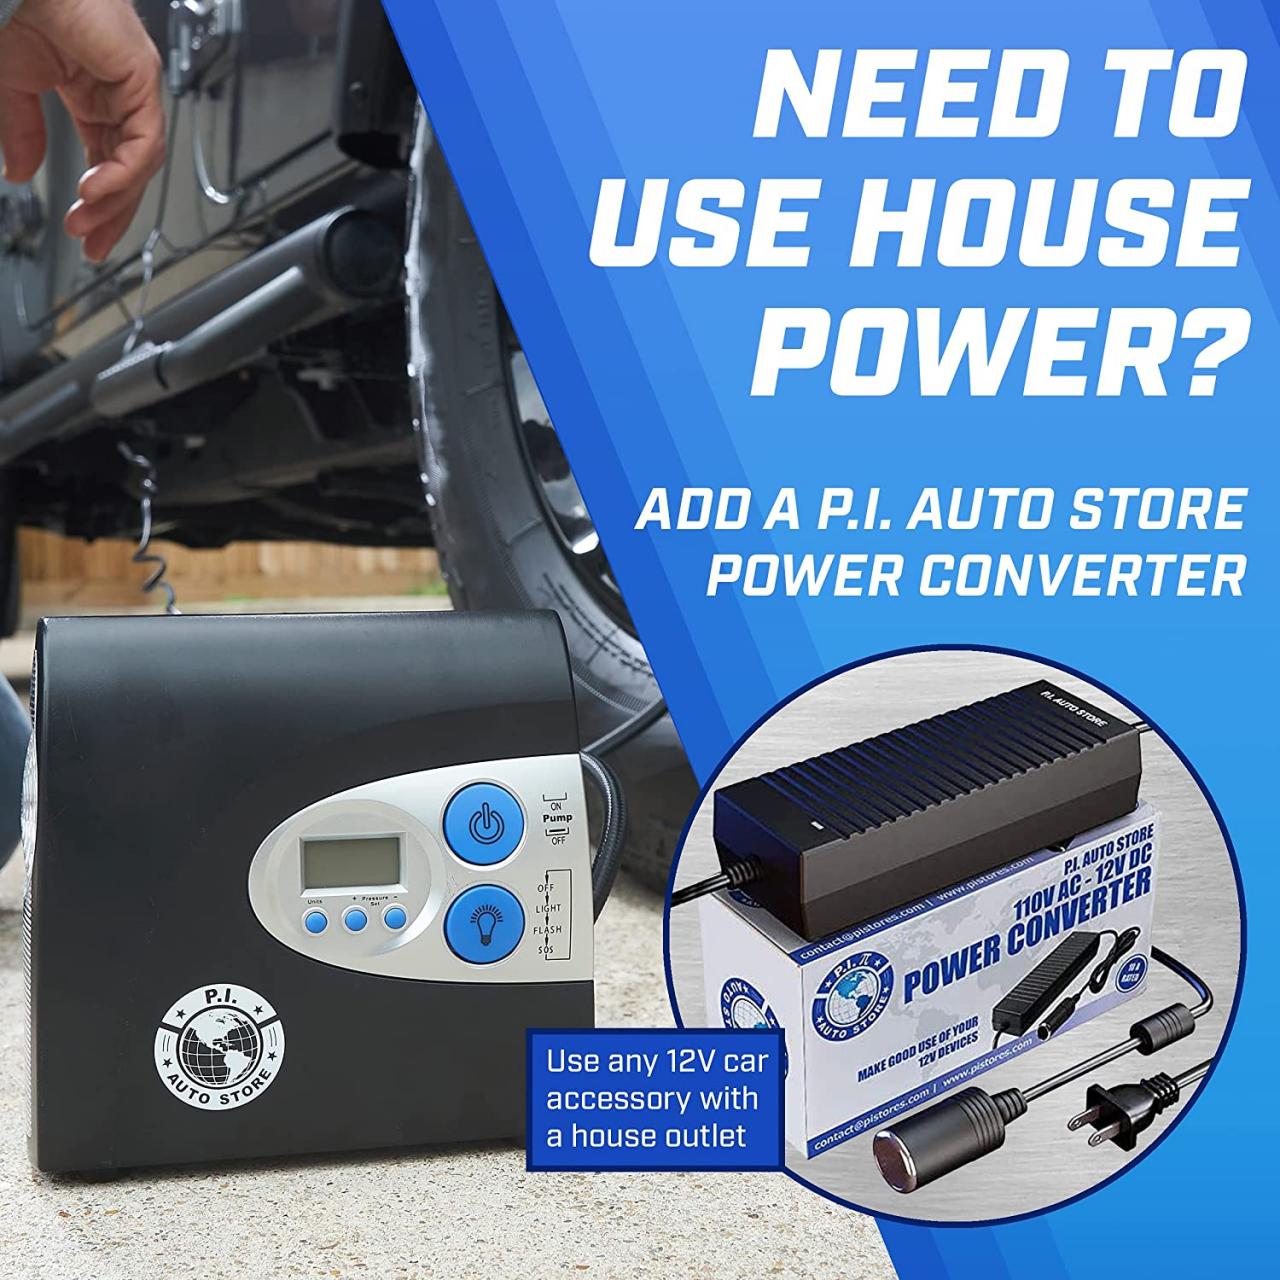 Buy PI AUTO] AIR COMPRESSOR Portable Tire Inflator with Pressure Gauge and  LED Light for Cars and Bikes. 12V DC Air Compressor Tire Inflator for car,  bicycles, balls and more. Turns off